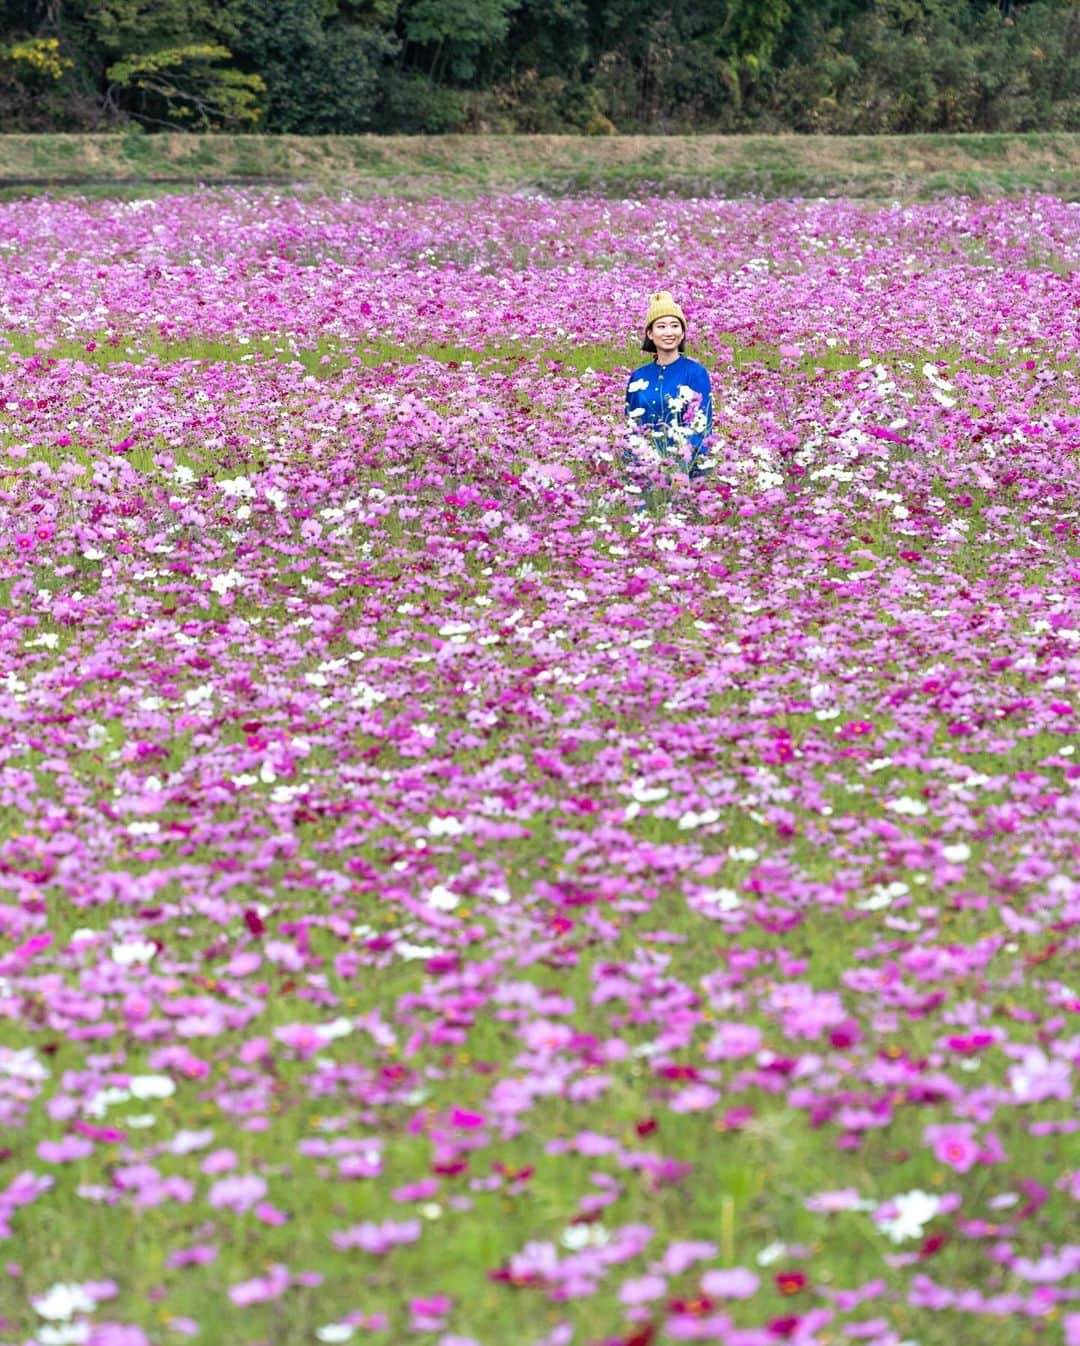 詩歩のインスタグラム：「一面に広がる400万本のコスモス畑💐 A field of 4 million cosmos trees spreading all over the area!  愛媛の宇和島市で開催中の #みま町コスモスまつり 。田んぼに植えられたピンク色の絨毯が道を挟んでずーっと奥まで続いてて、その規模にびっくり😳😳写真で写ってるのは本当にごく一部なの！  全国いろいろなコスモス畑を見てきたけど、私がみた中で一番広いコスモス畑な気がする👏👏  （写真はうまく撮れなかったんだけど）コスモス畑の中には徳島から遊びに来ていたカカシもたくさんいて、観光客なのかカカシなのか、よく見ないと分からなかったのが面白かった〜笑  例年の見頃は10月下旬〜11月上旬頃で、今年は今週末くらいまでとのことです。  愛媛県の観光情報はこちら @iyokannet https://www.iyokannet.jp/  愛媛県さんのお仕事で取材してきました🍊これまでの絶景写真は #詩歩のえひめ旅 でまとめています / Posts of this area can be found in this tag. #shiho_ehime  The Mimama-cho Cosmos Festival is being held in Ehime, Japan. I was surprised at the scale of the pink carpet of cosmos planted in the rice paddies that stretched all the way across the road. I have seen many cosmos fields all over Japan, but I think this is the largest cosmos field I have ever seen! There were many scarecrows from Tokushima in the cosmos field, and it was interesting that you had to look carefully to figure out if they were tourists or scarecrows...! Usually the best time to see them is from late October to early November, and this year they will be around until the end of this week.  📷6th Nov 2023 📍愛媛県 みま町コスモスまつり / Mima Town Cosmos Festival, Ehime Japan    ©︎Shiho/詩歩」